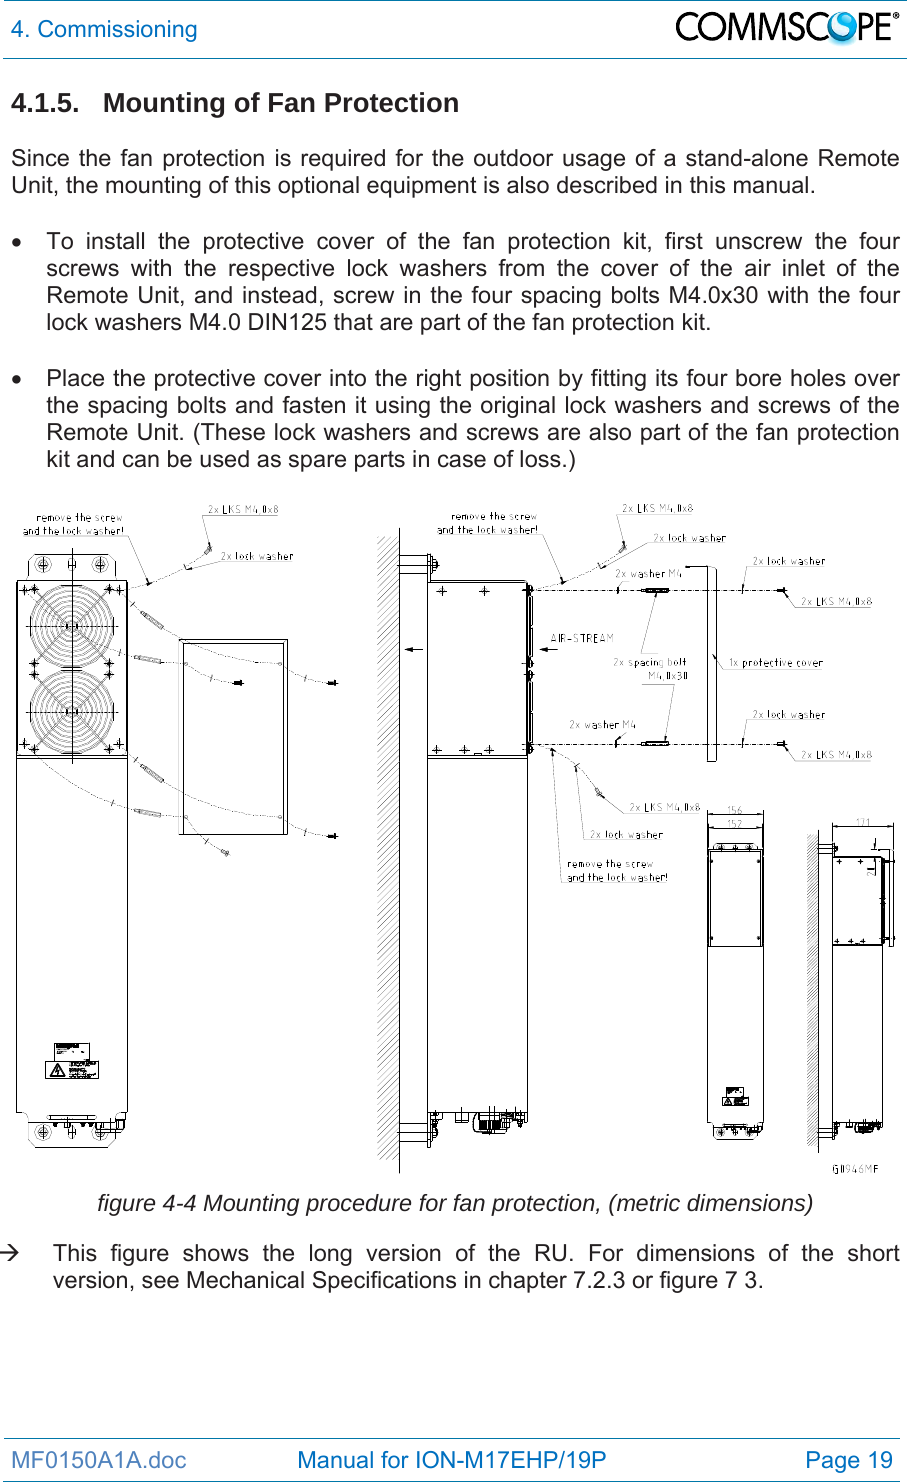 4. Commissioning  MF0150A1A.doc                 Manual for ION-M17EHP/19P  Page 19 4.1.5.  Mounting of Fan Protection  Since the fan protection is required for the outdoor usage of a stand-alone Remote Unit, the mounting of this optional equipment is also described in this manual.    To install the protective cover of the fan protection kit, first unscrew the four screws with the respective lock washers from the cover of the air inlet of the Remote Unit, and instead, screw in the four spacing bolts M4.0x30 with the four lock washers M4.0 DIN125 that are part of the fan protection kit.    Place the protective cover into the right position by fitting its four bore holes over the spacing bolts and fasten it using the original lock washers and screws of the Remote Unit. (These lock washers and screws are also part of the fan protection kit and can be used as spare parts in case of loss.)   figure 4-4 Mounting procedure for fan protection, (metric dimensions)   This figure shows the long version of the RU. For dimensions of the short version, see Mechanical Specifications in chapter 7.2.3 or figure 7 3. 